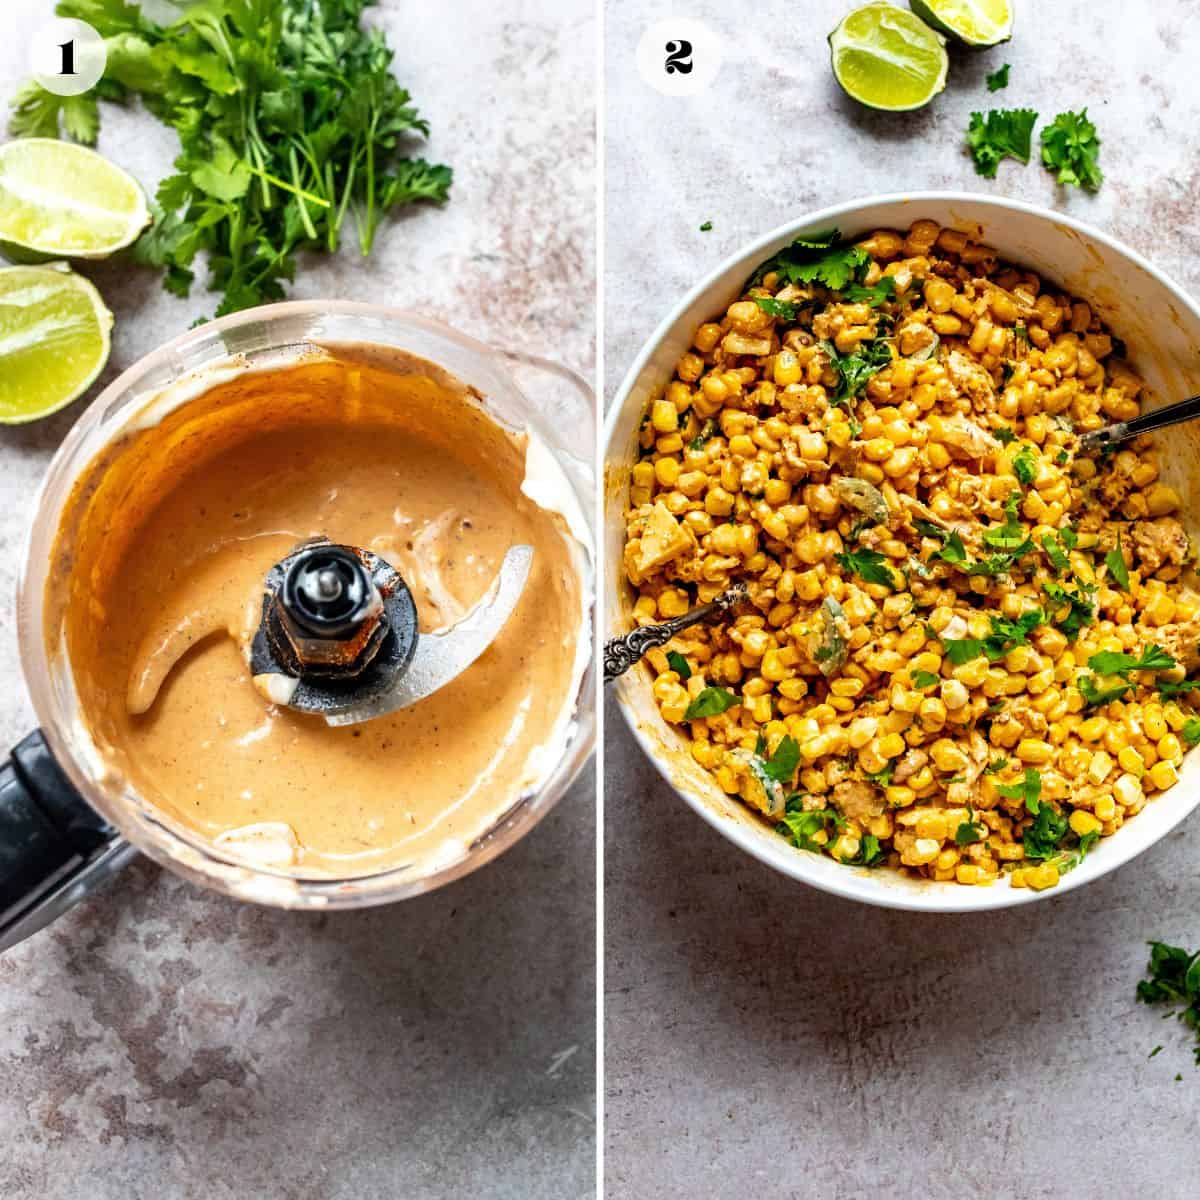 A collage of two photos. On the left is an image of the sauce in a food processor, and on the right is corn in a bowl.